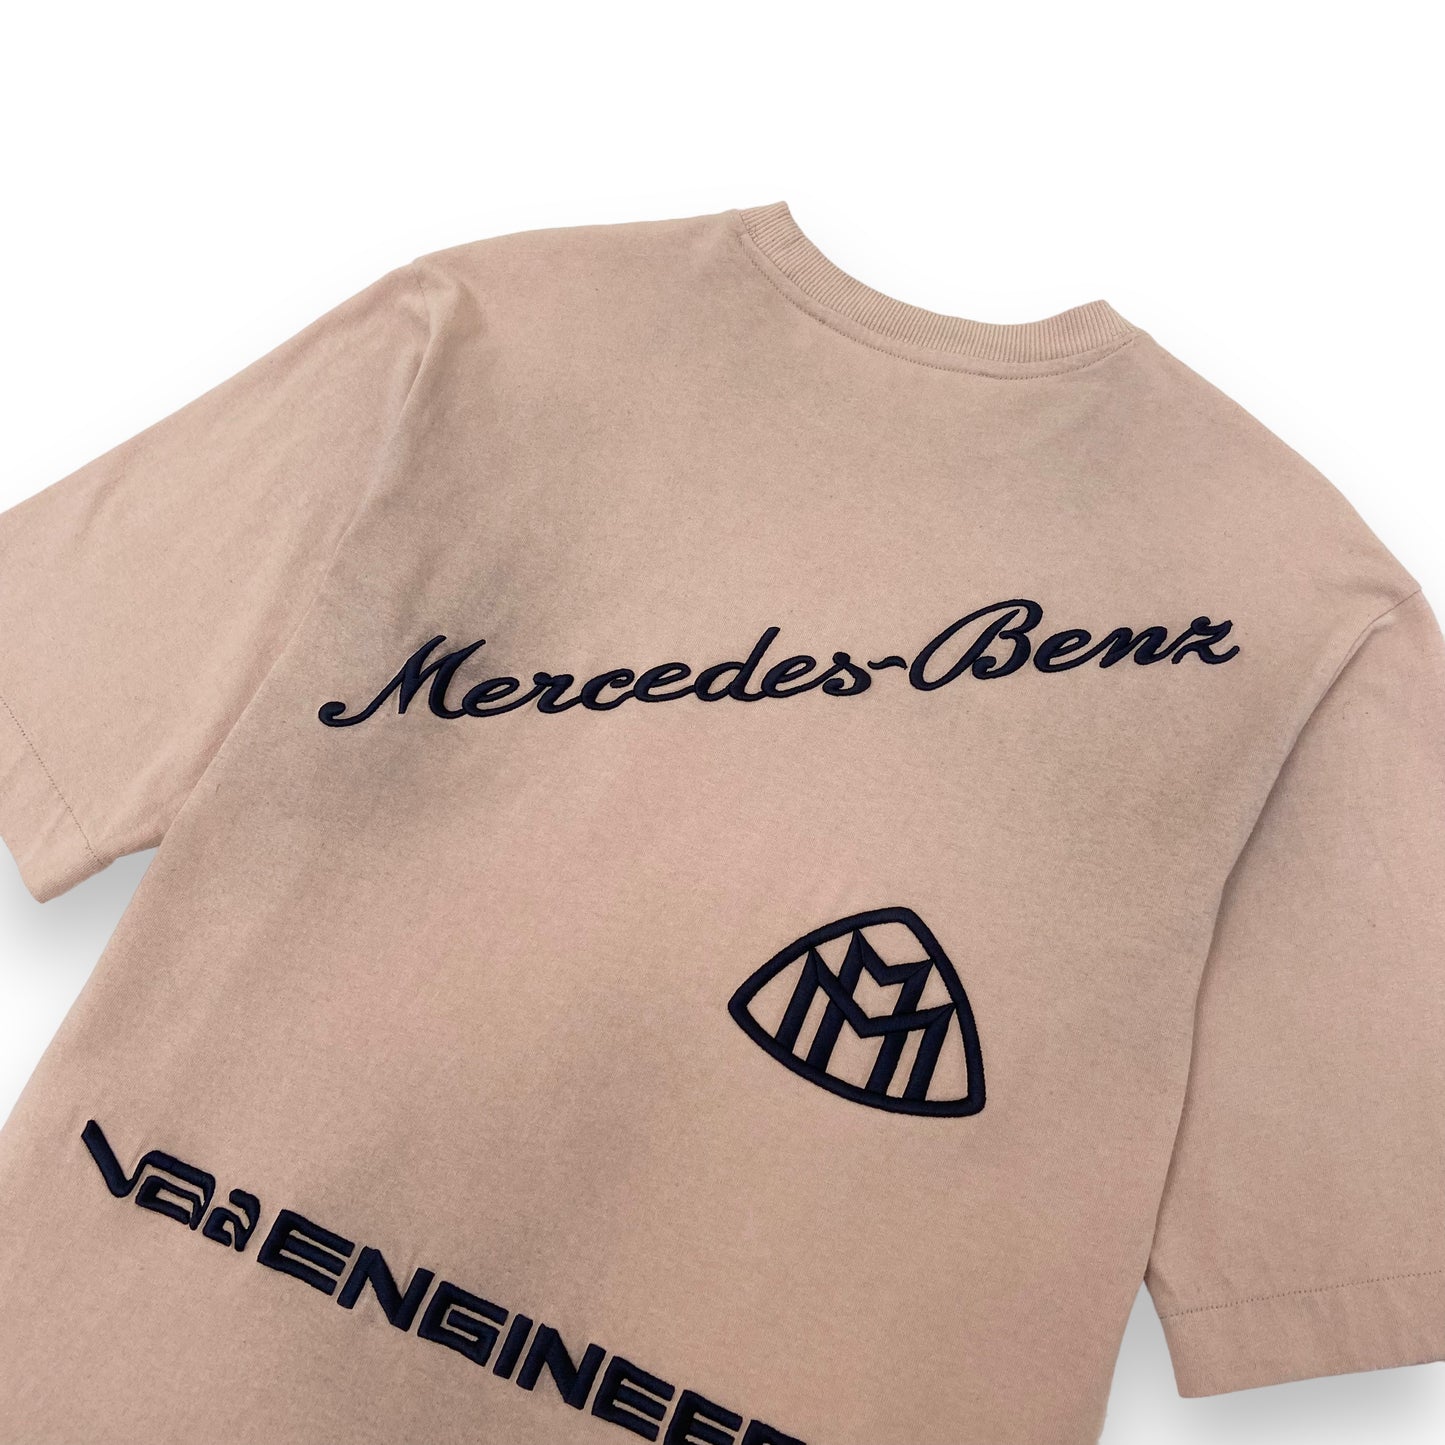 OFF-WHITE MERCEDES AMG DISTRESSED T-SHIRT BEIGE S